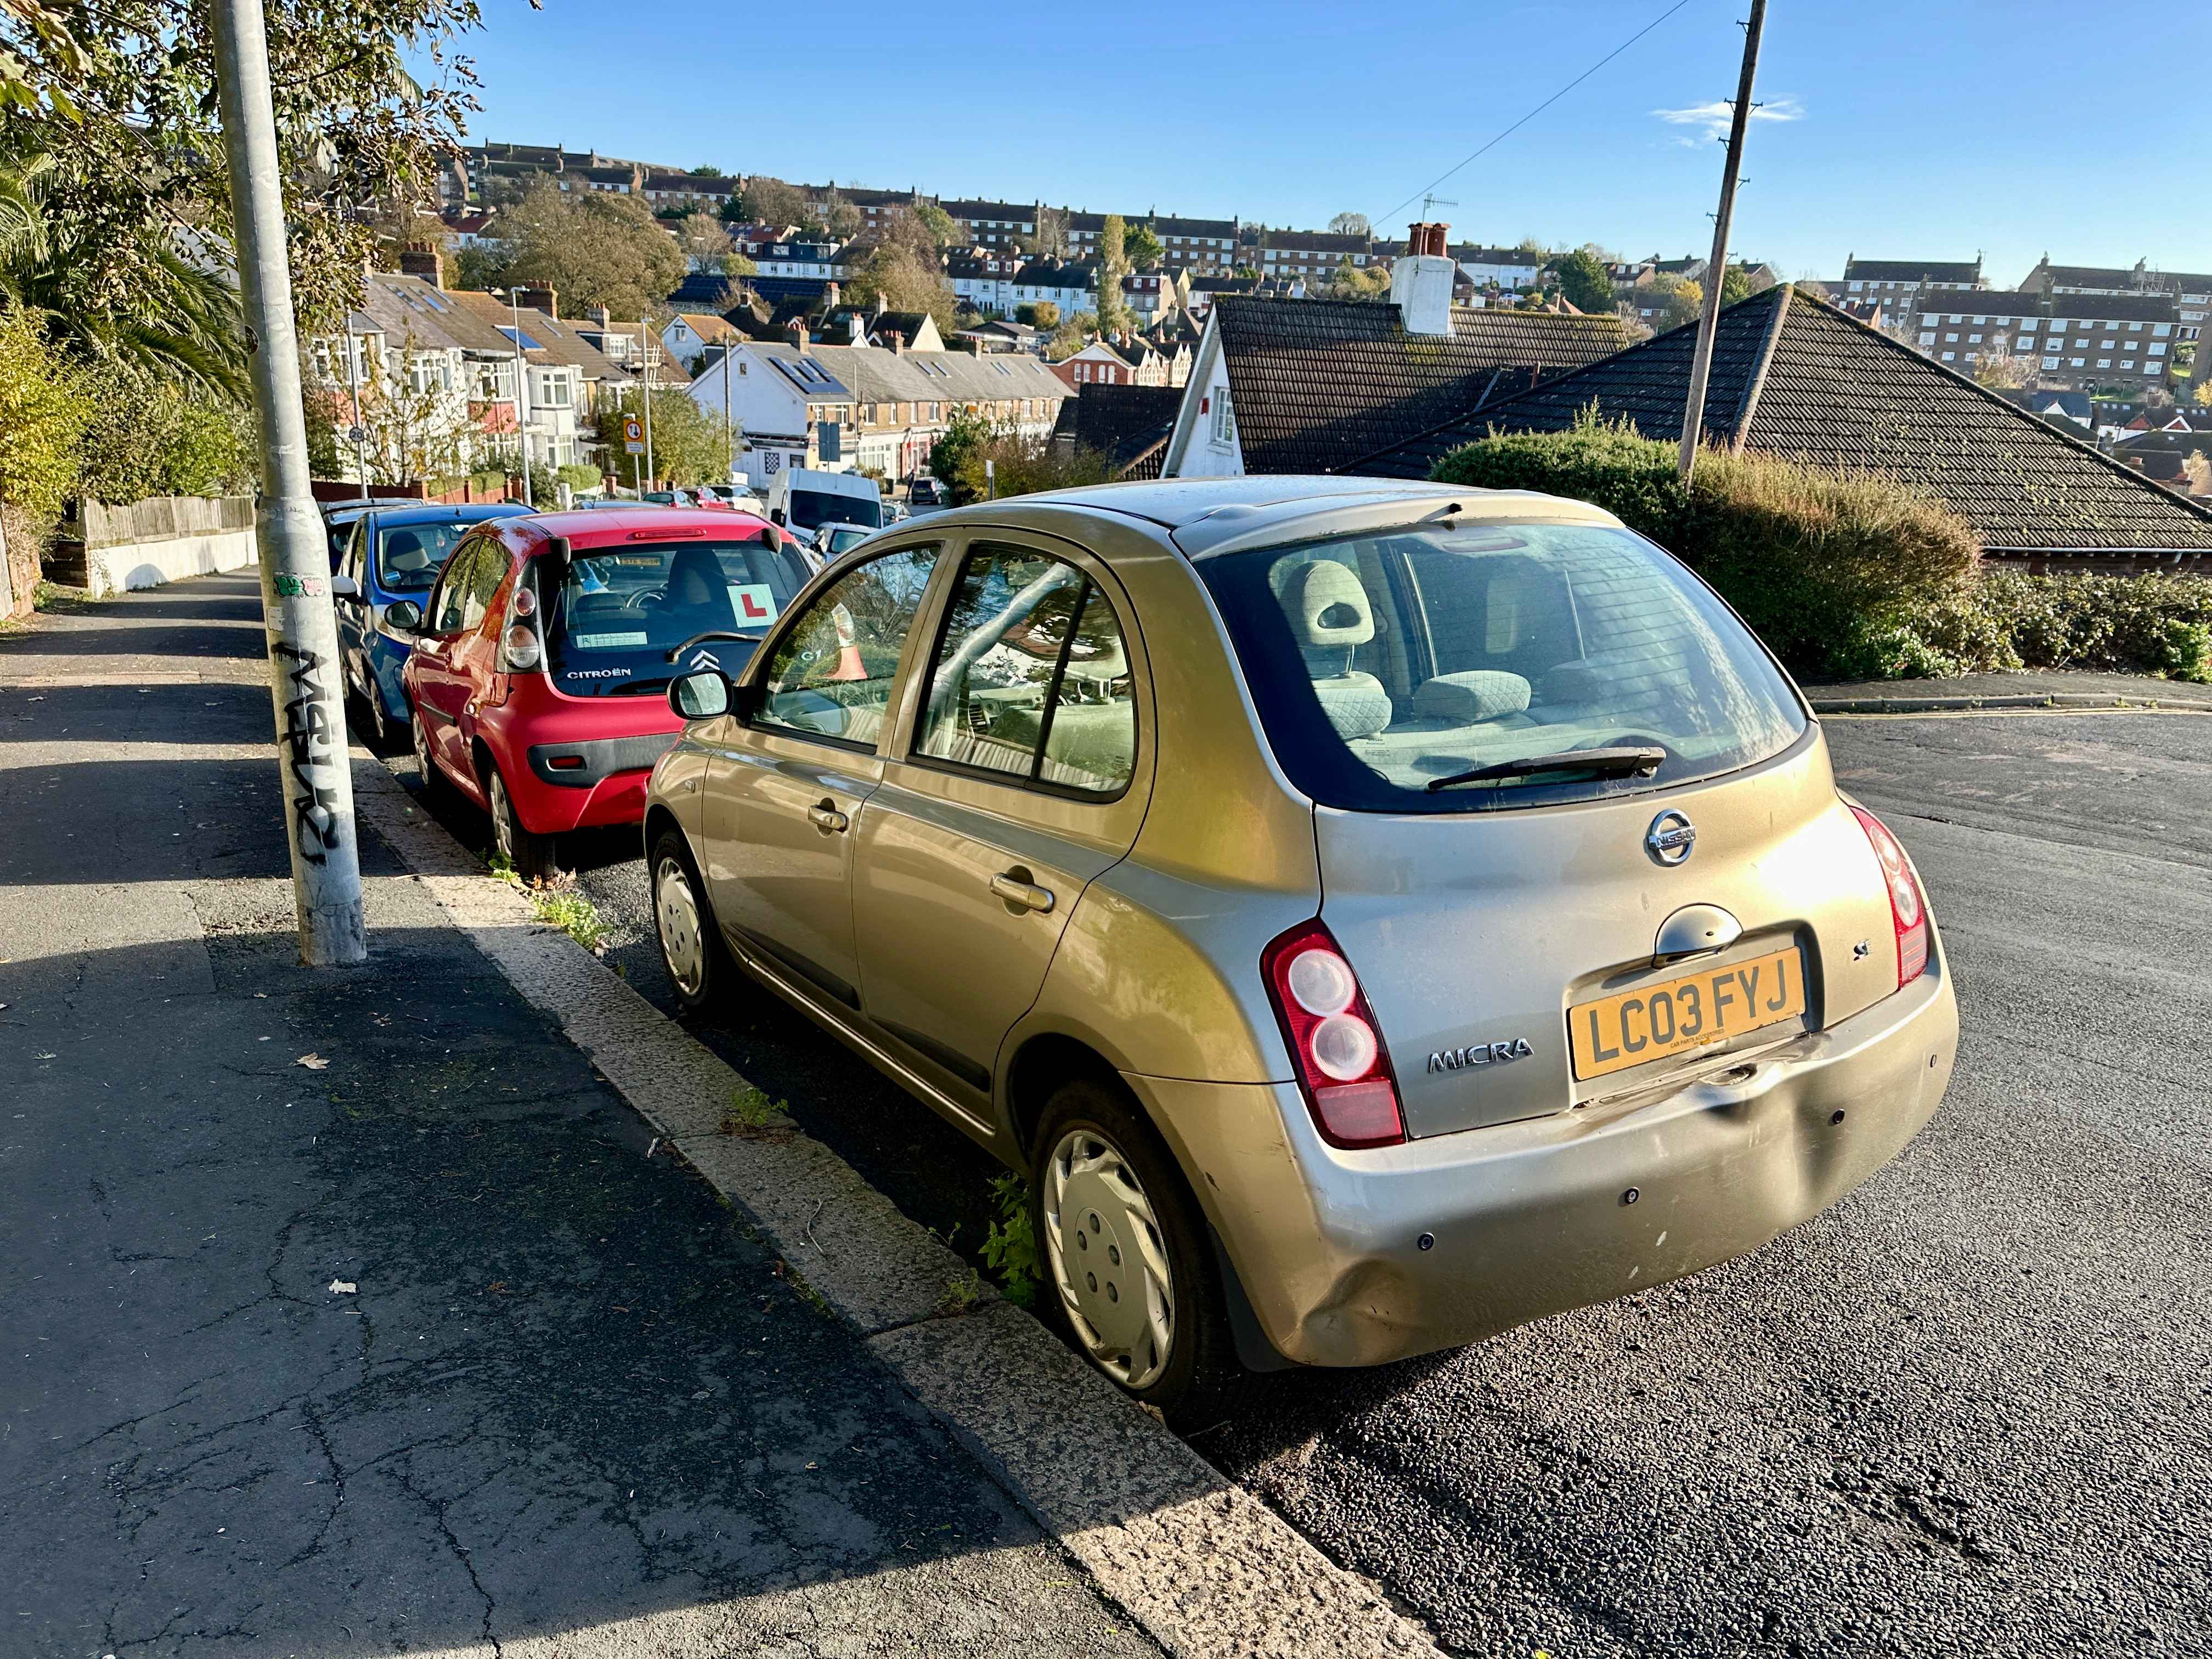 Photograph of LC03 FYJ - a Gold Nissan Micra parked in Hollingdean by a non-resident, and potentially abandoned. The eighth of seventeen photographs supplied by the residents of Hollingdean.